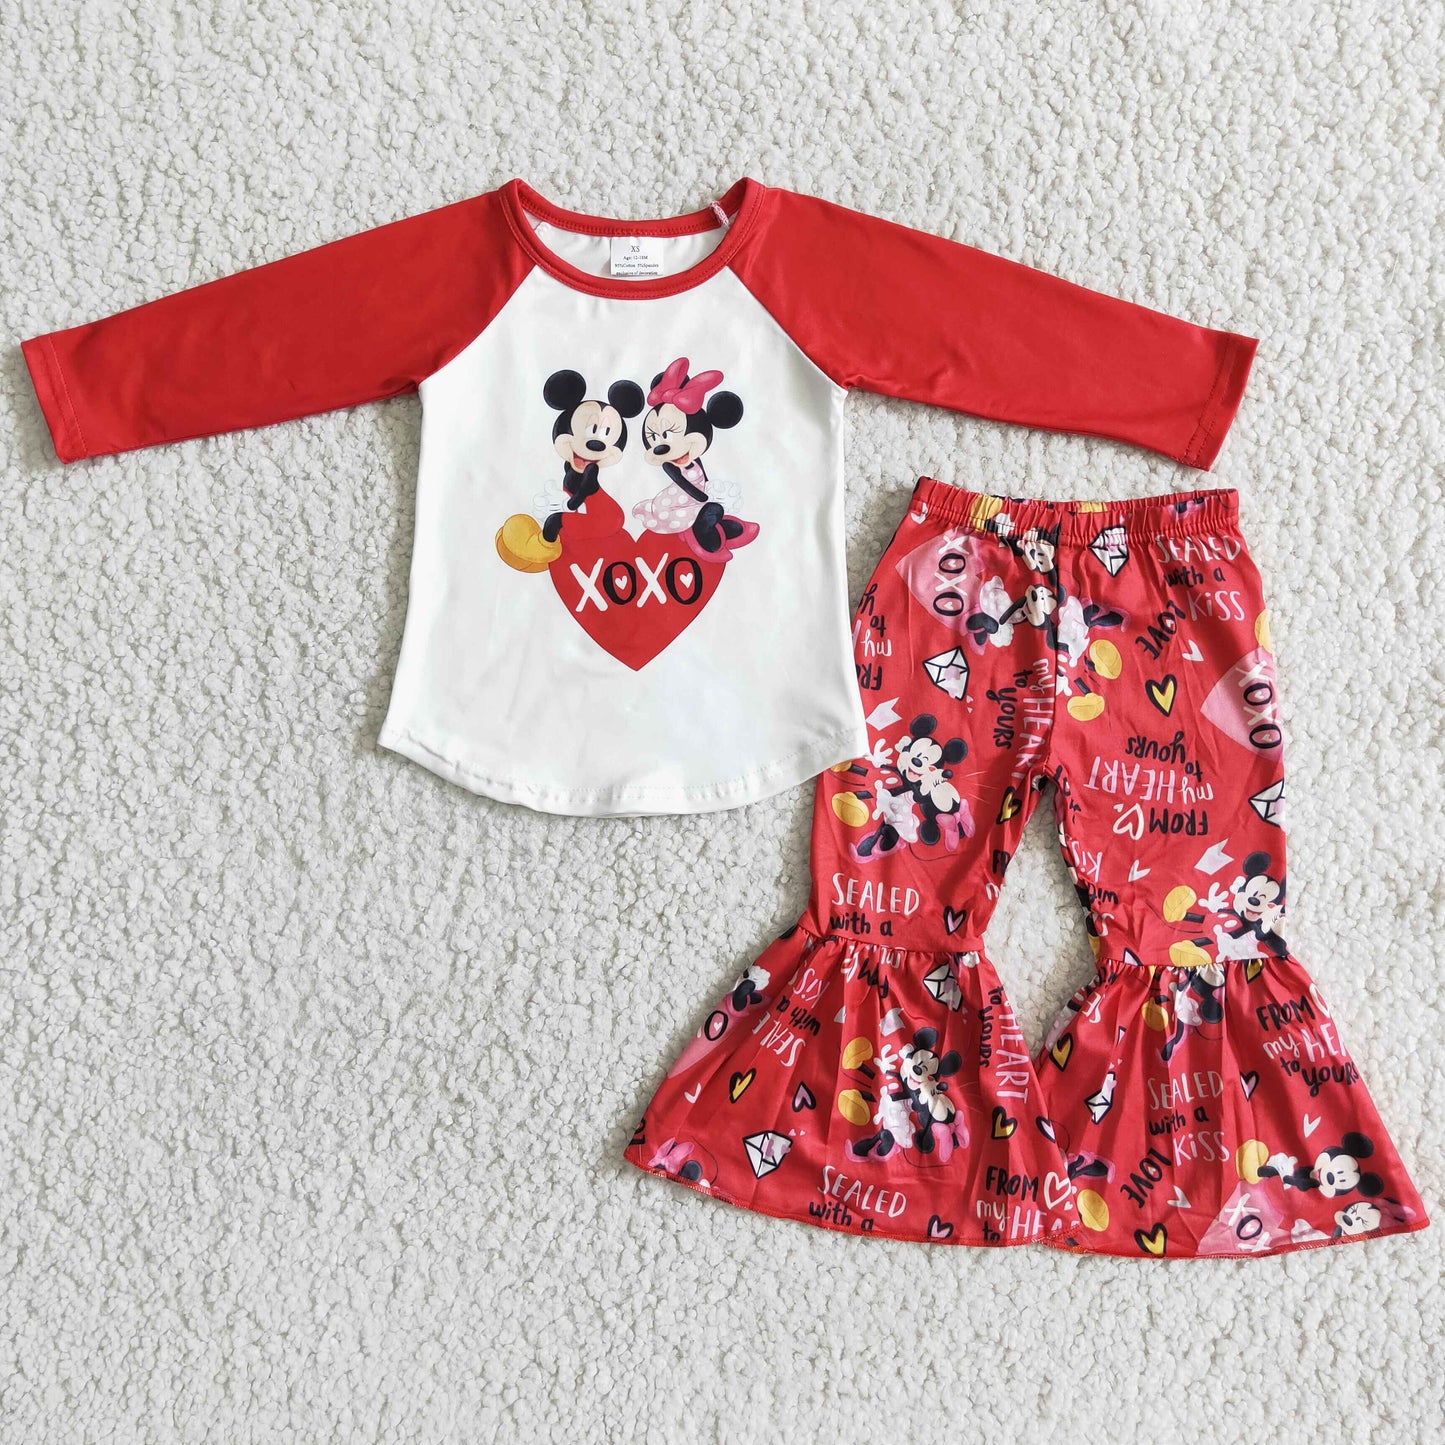 Toddle girls Valentines day outfits， 6 b13-28